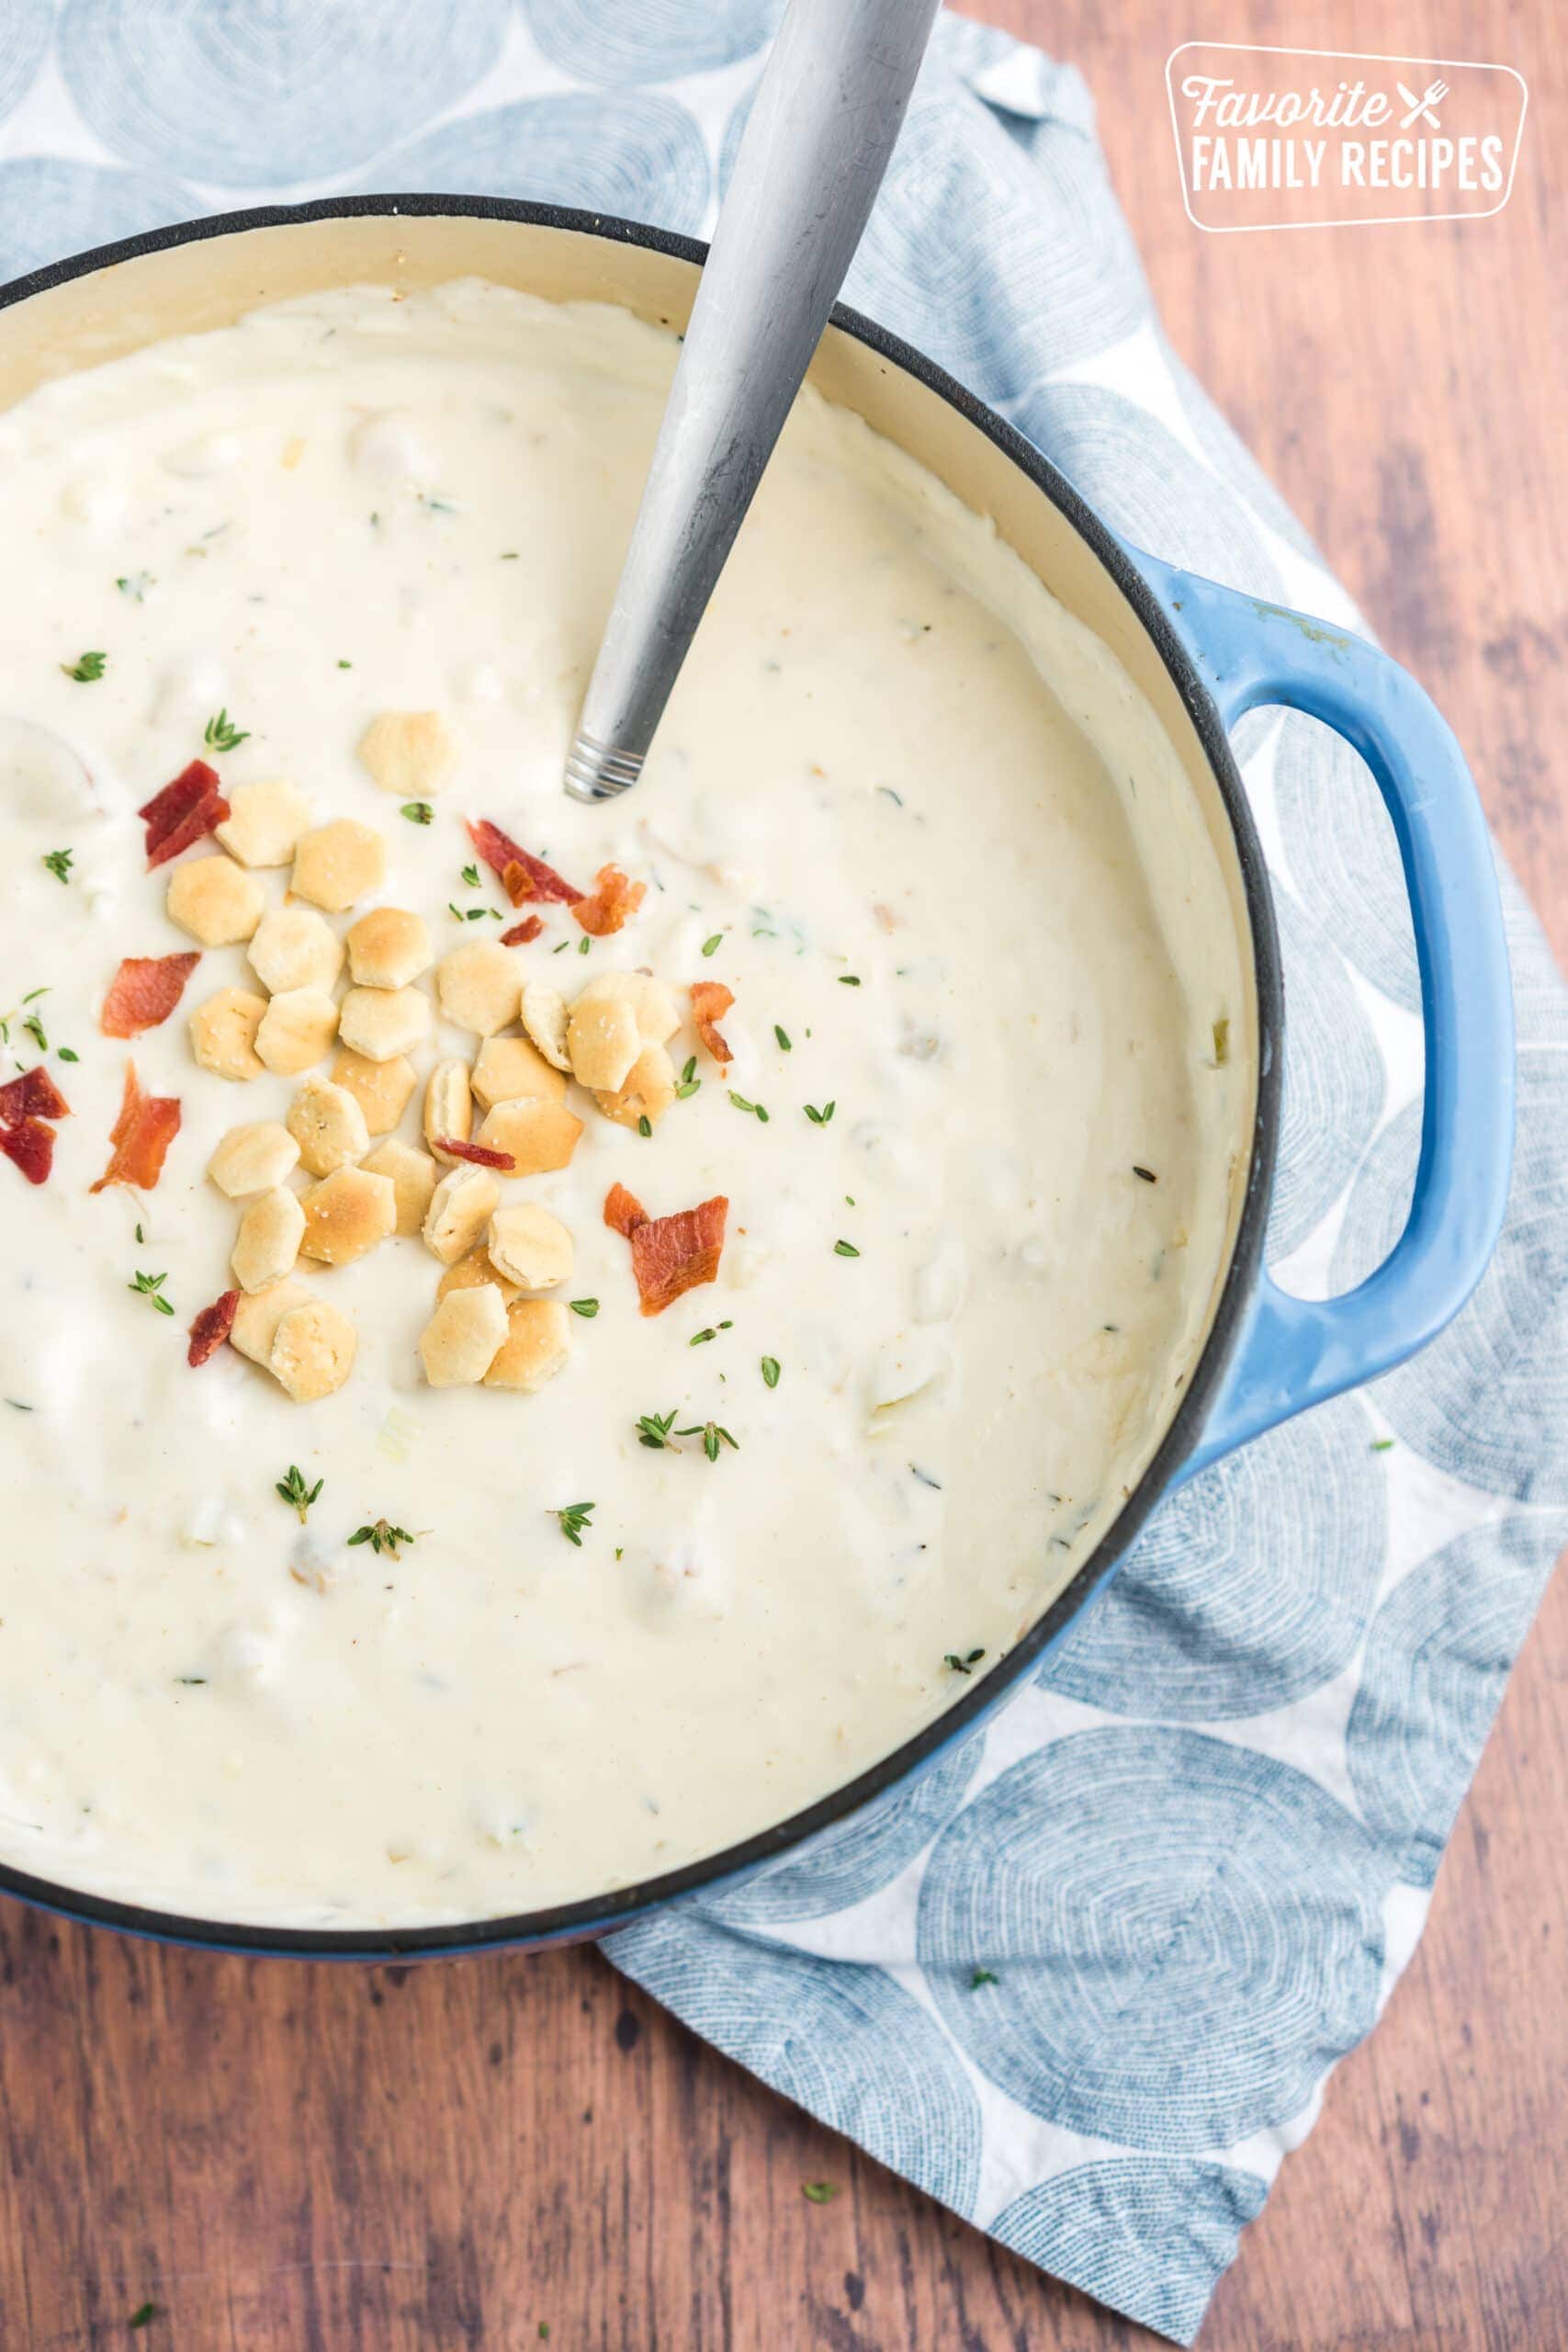 https://www.favfamilyrecipes.com/wp-content/uploads/2020/09/Best-Clam-Chowder-7-scaled.jpg